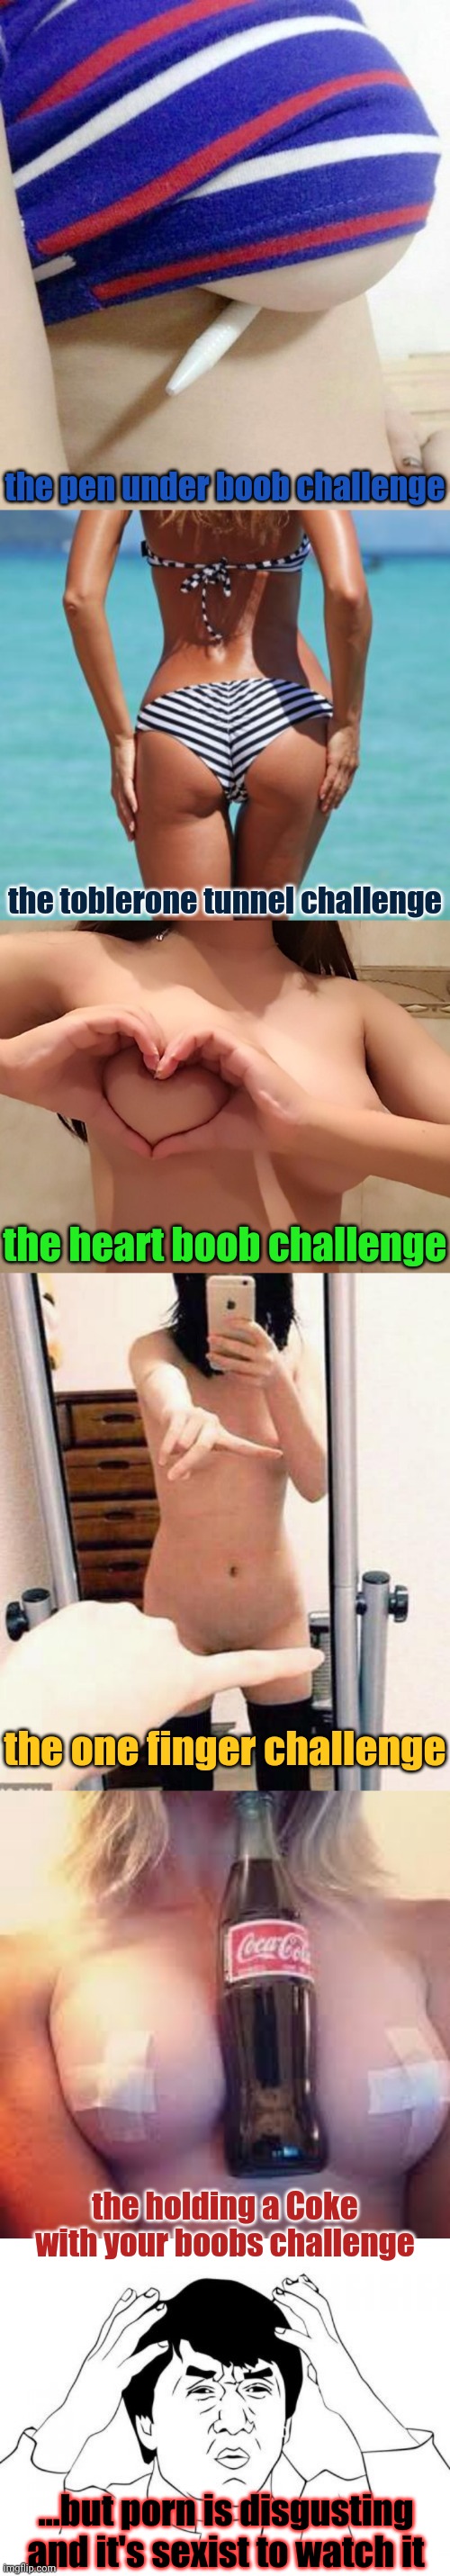 Some people like to show their bodies and some people enjoy seeing it. I don't get the difference. | the pen under boob challenge; the toblerone tunnel challenge; the heart boob challenge; the one finger challenge; the holding a Coke with your boobs challenge; ...but porn is disgusting and it's sexist to watch it | image tagged in memes,jackie chan wtf,naked,sexy,porn | made w/ Imgflip meme maker